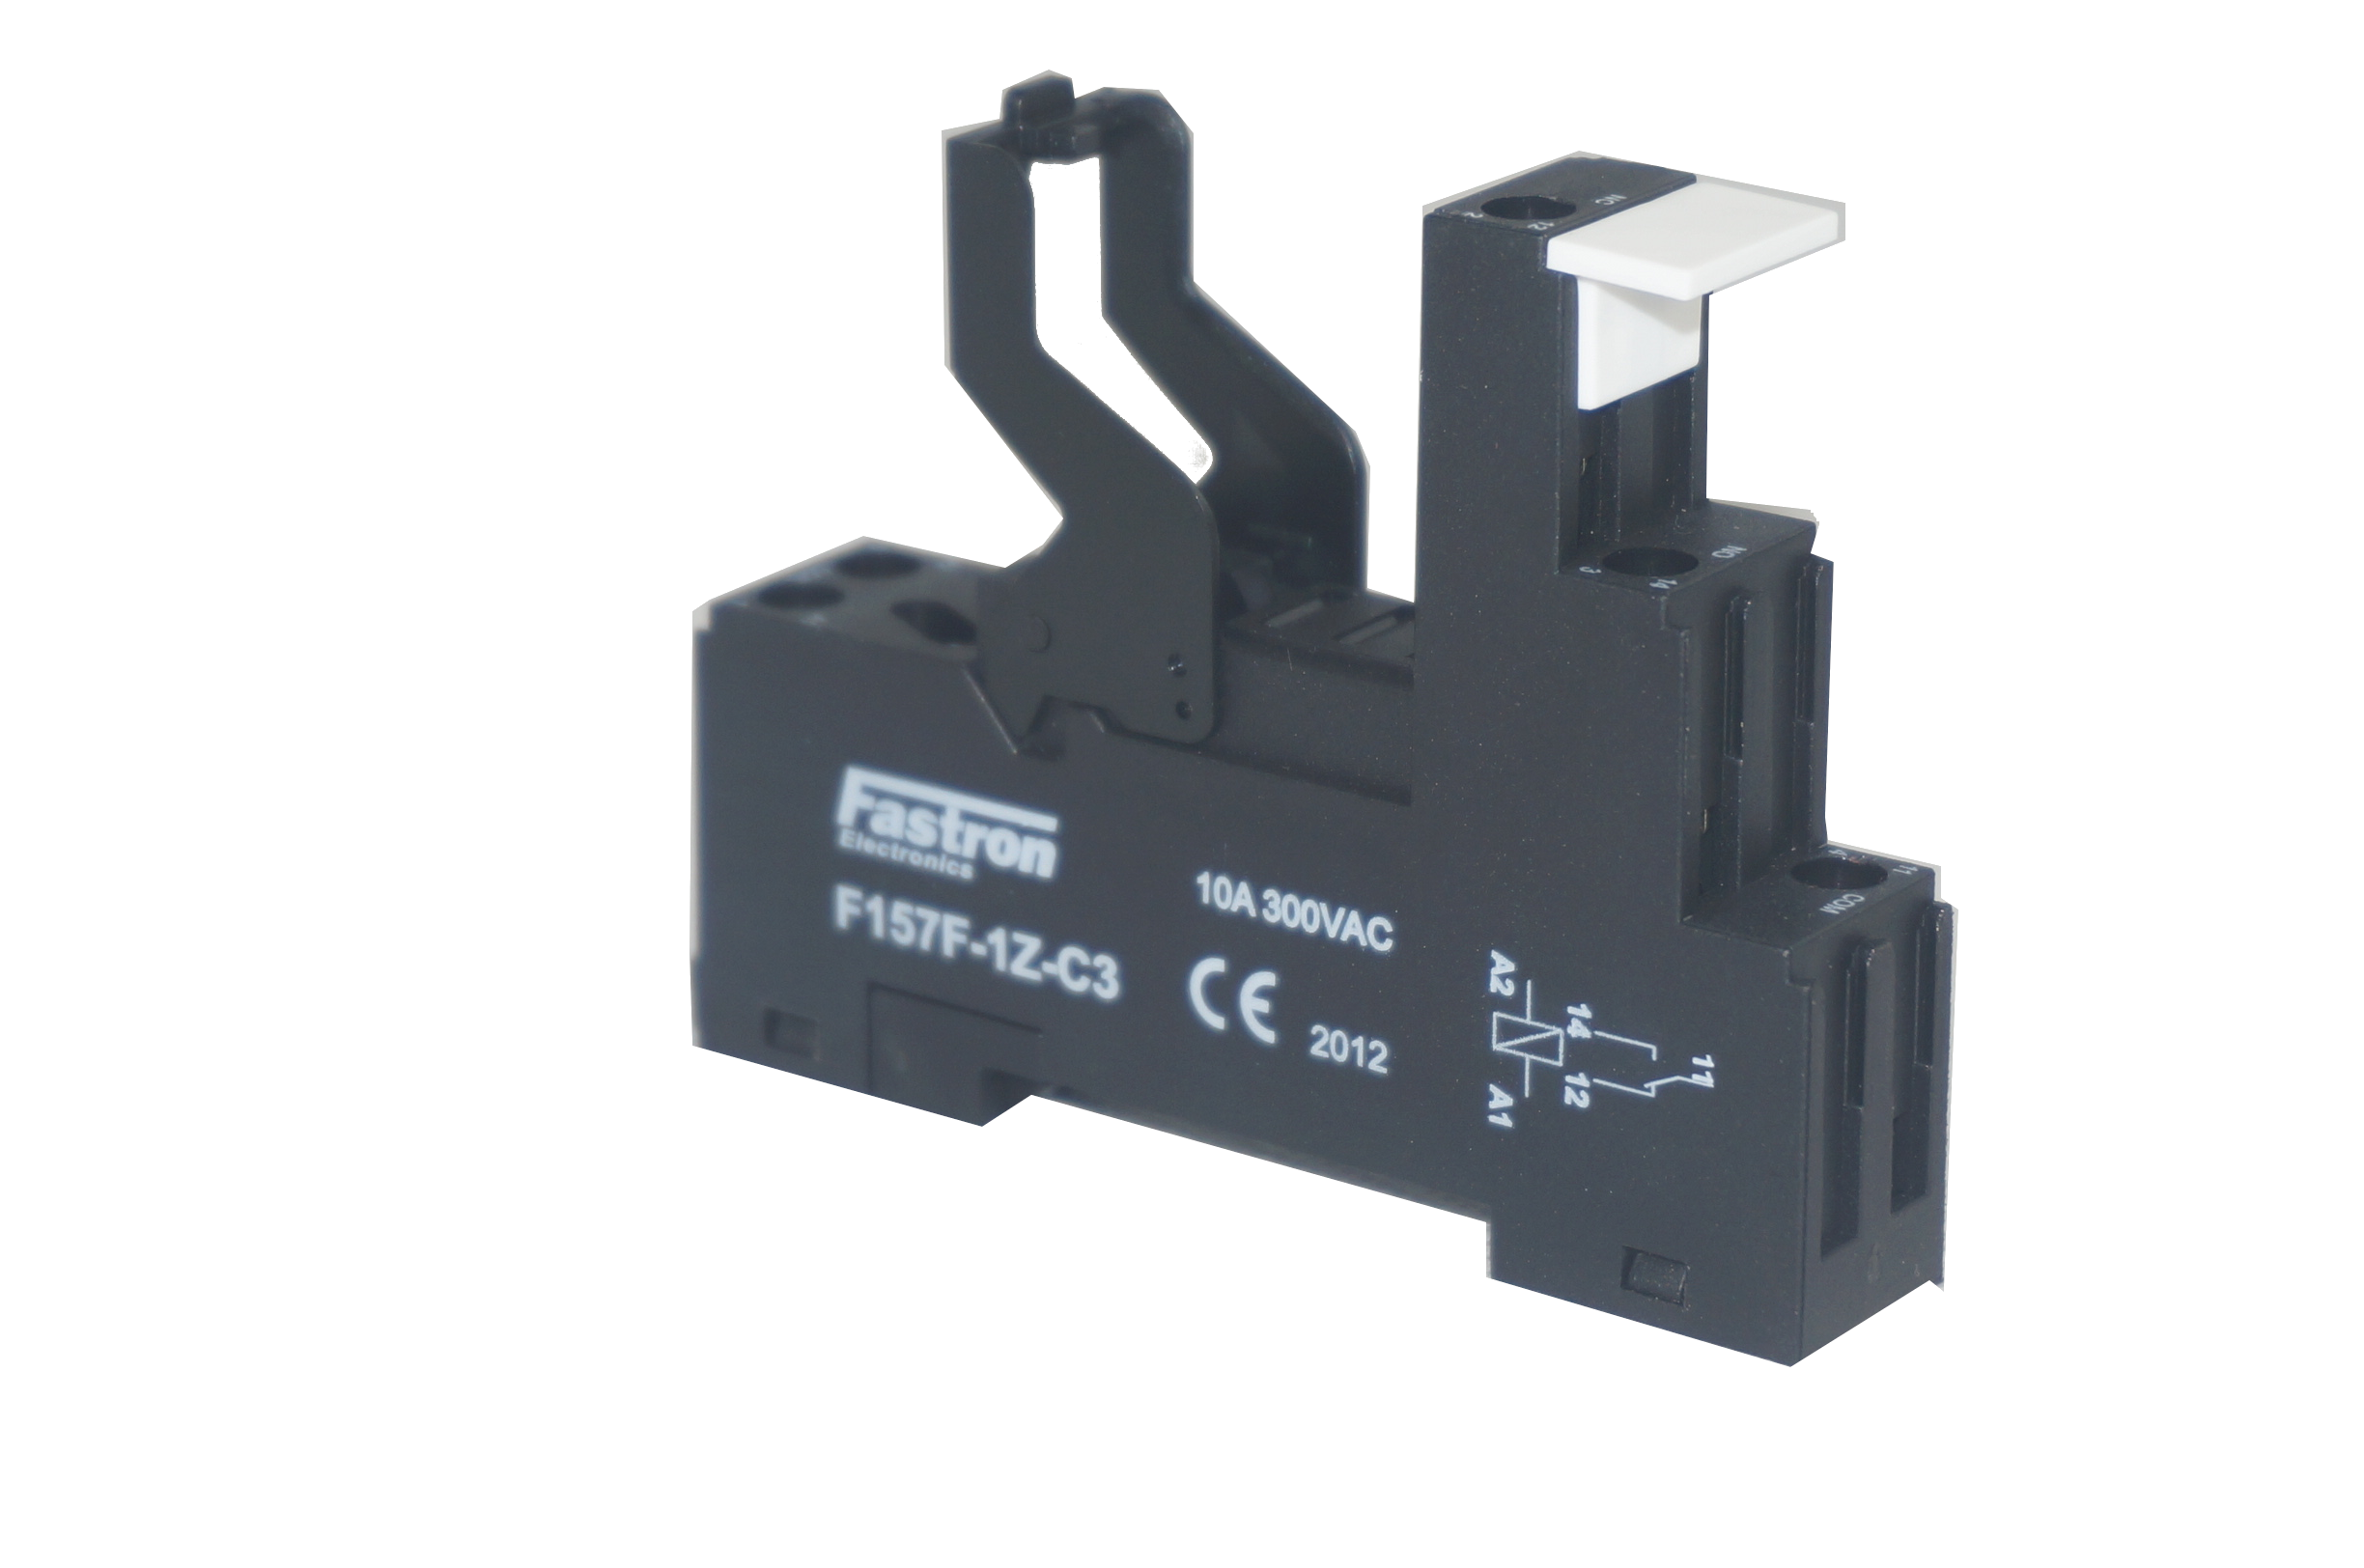 F157FT1PL 12A 24VDC + F157F-1Z-C3, Relay, 1 x SPDT 12 Amp, 250VAC/30VDC Load, 24VDC Coil-Relay-Fastron Electronics-Fastron Electronics Store